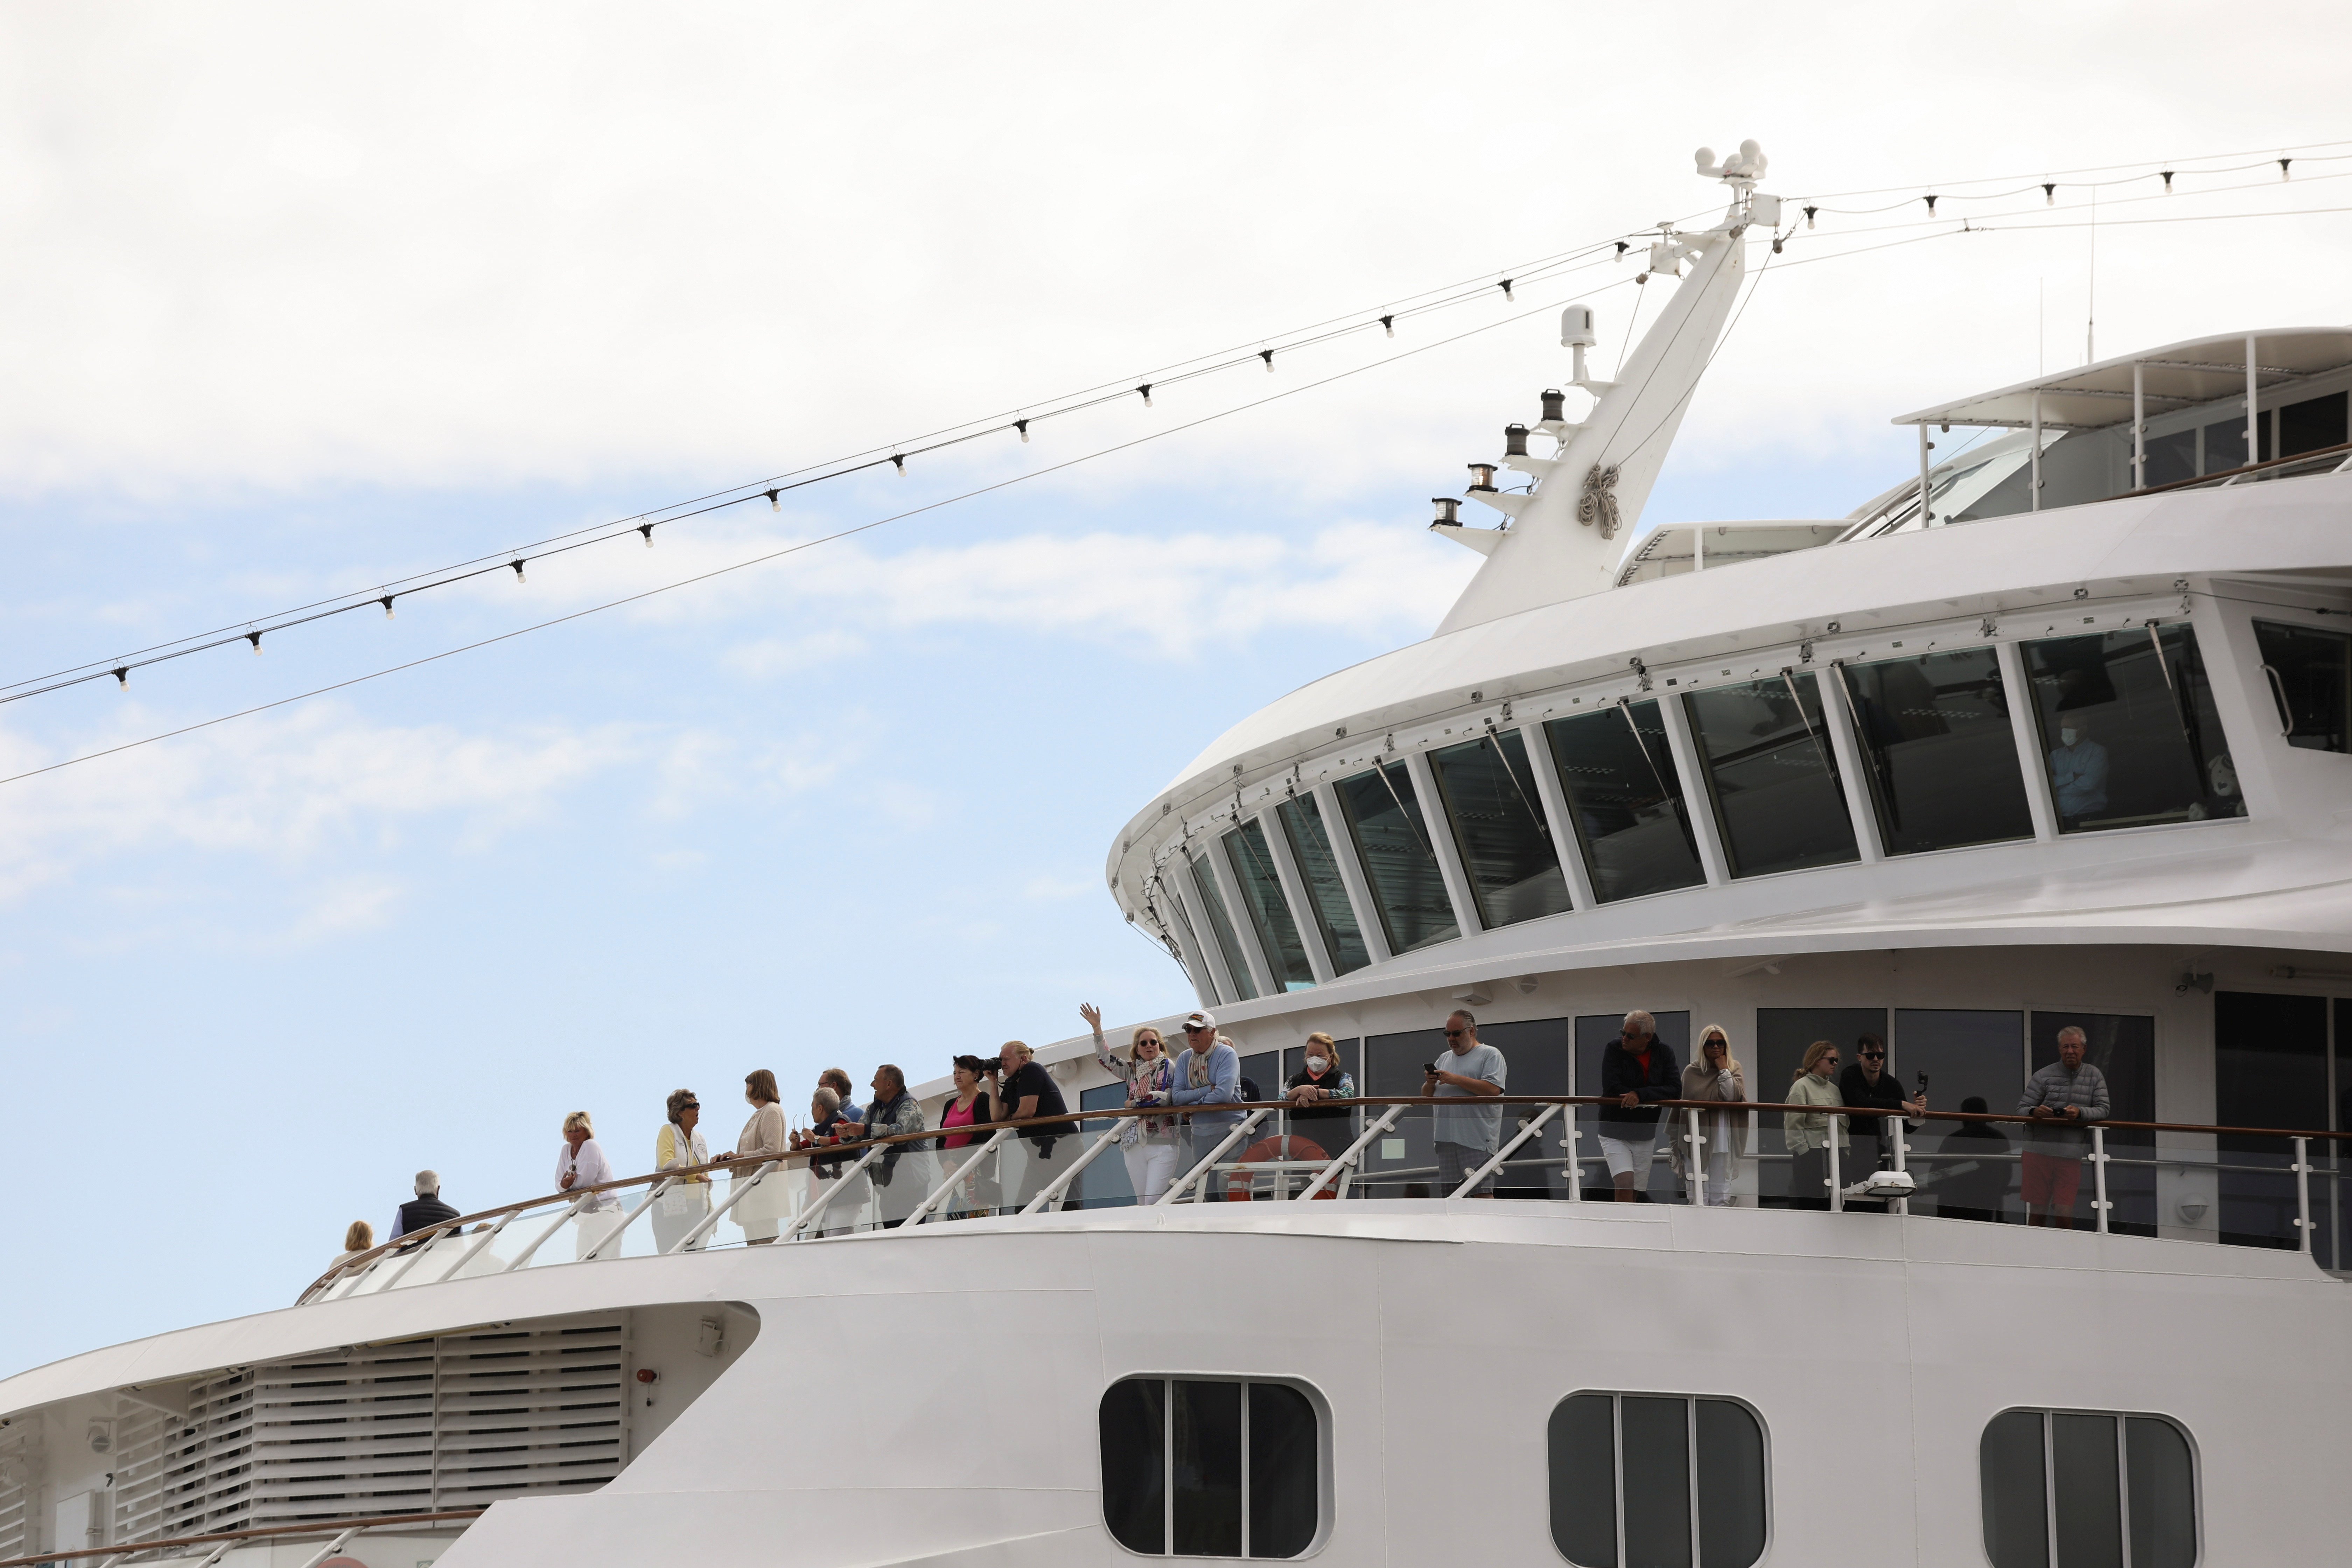 First post-COVID cruise ship docks in Cape Town